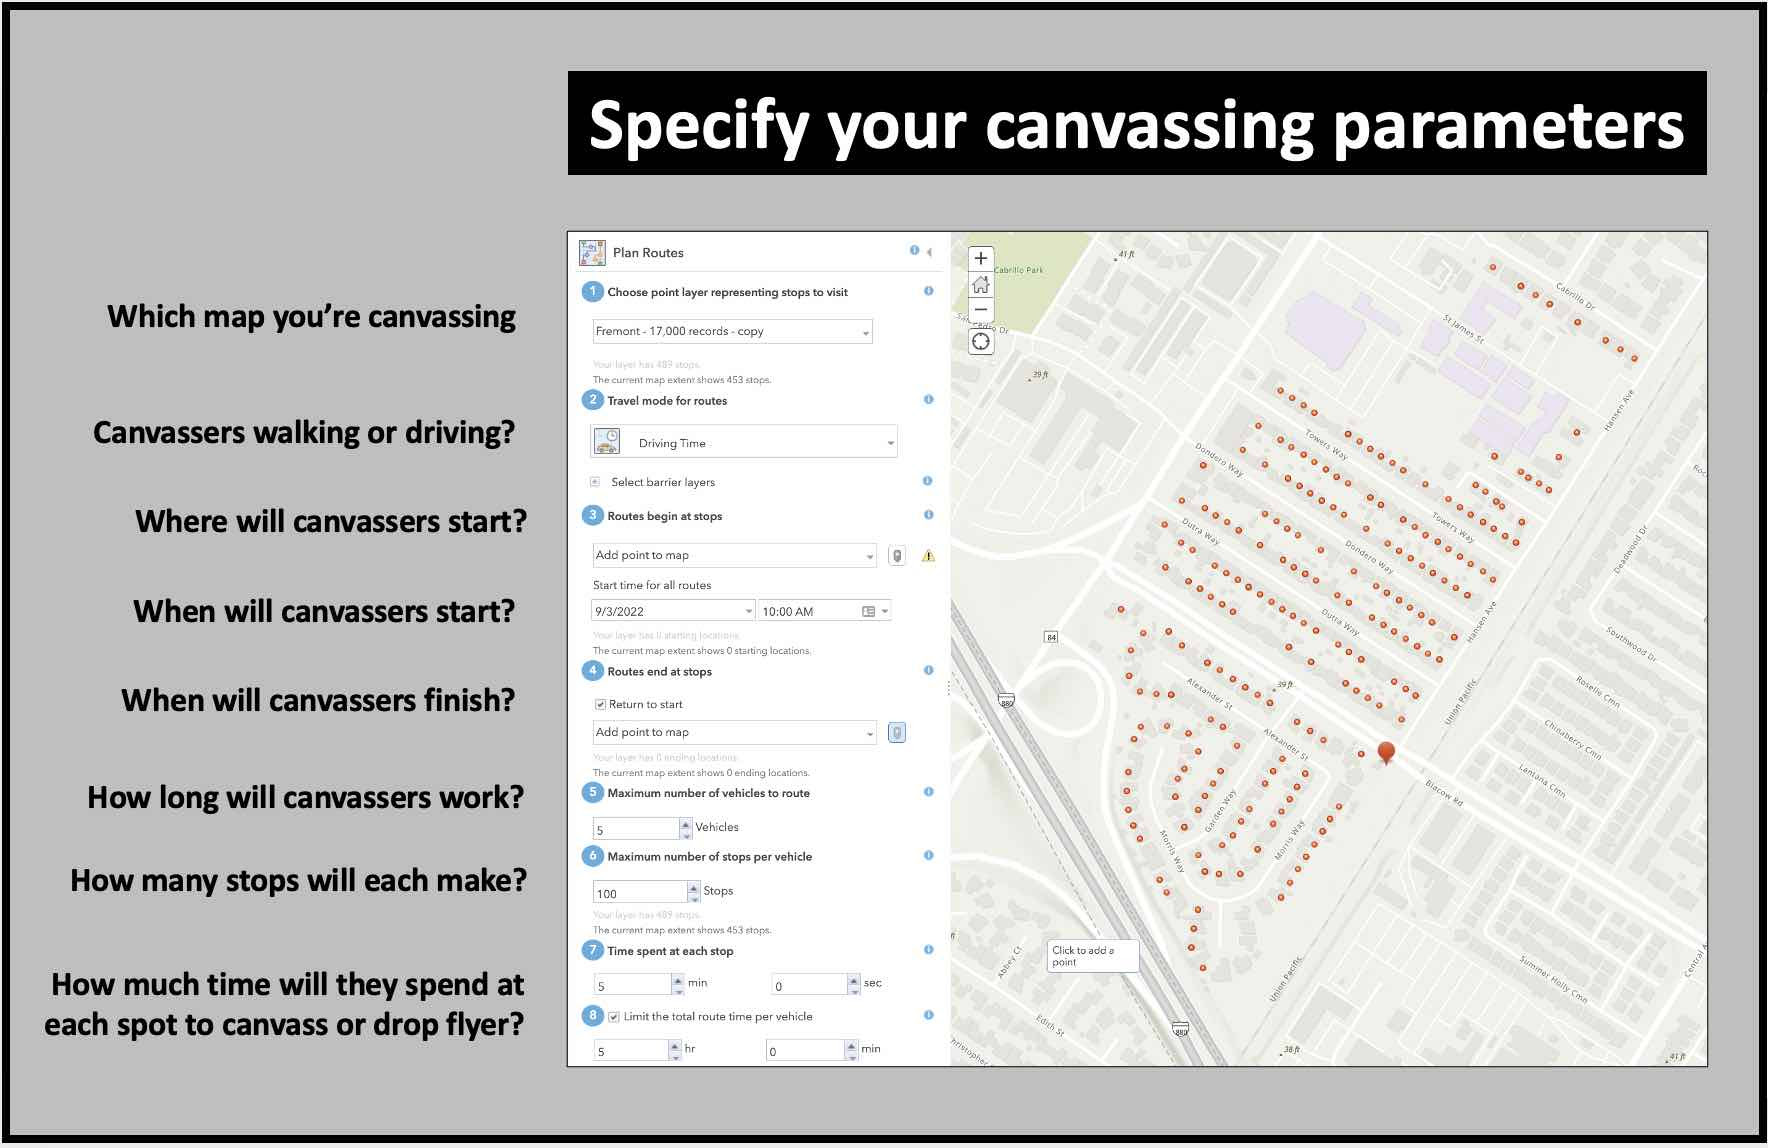 Specify your canvassing plans and let the ArcGIS Online software prepare the walking routes